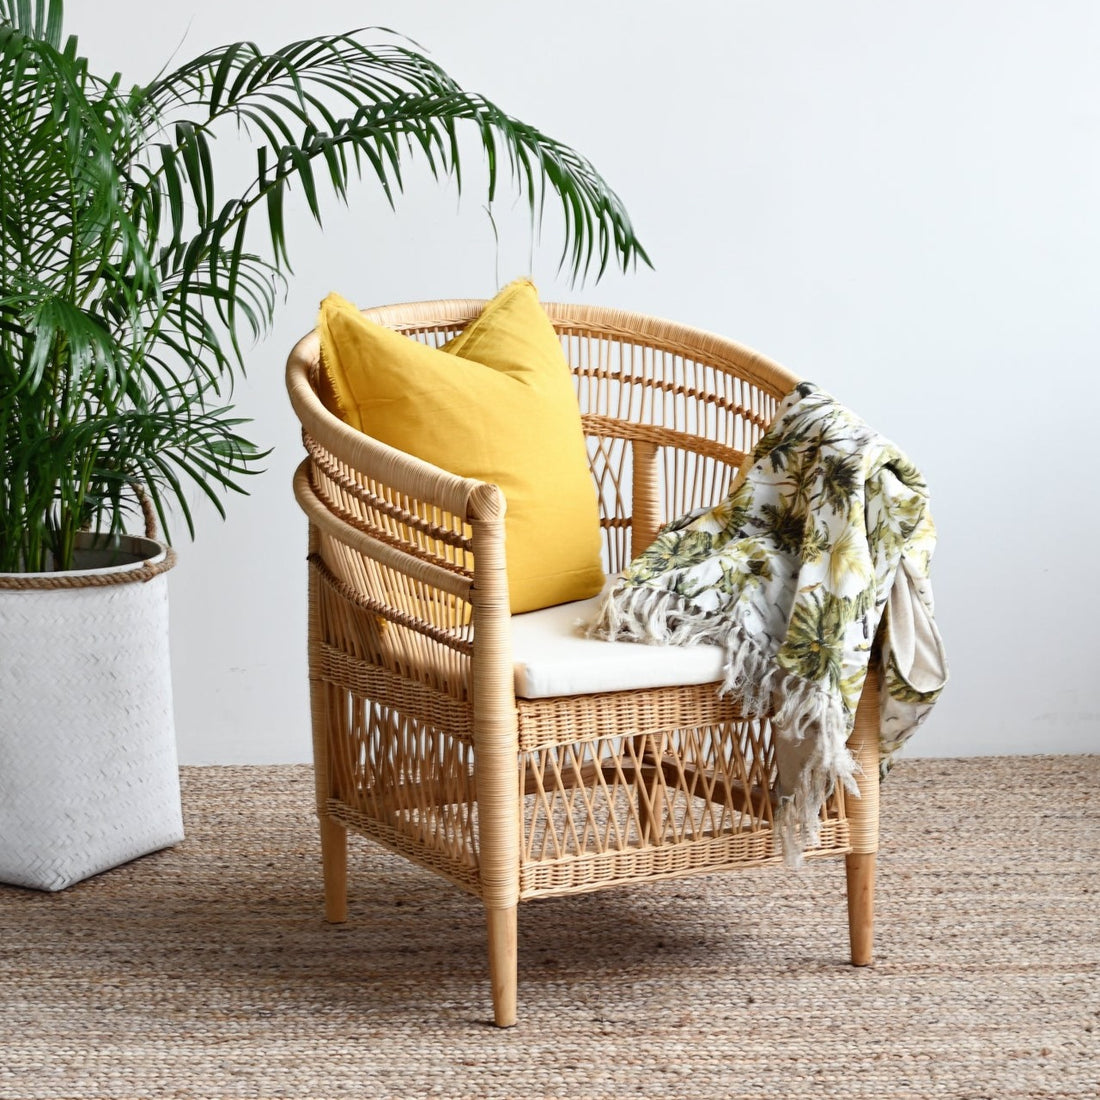 Malawi Arm Chair in natural finish